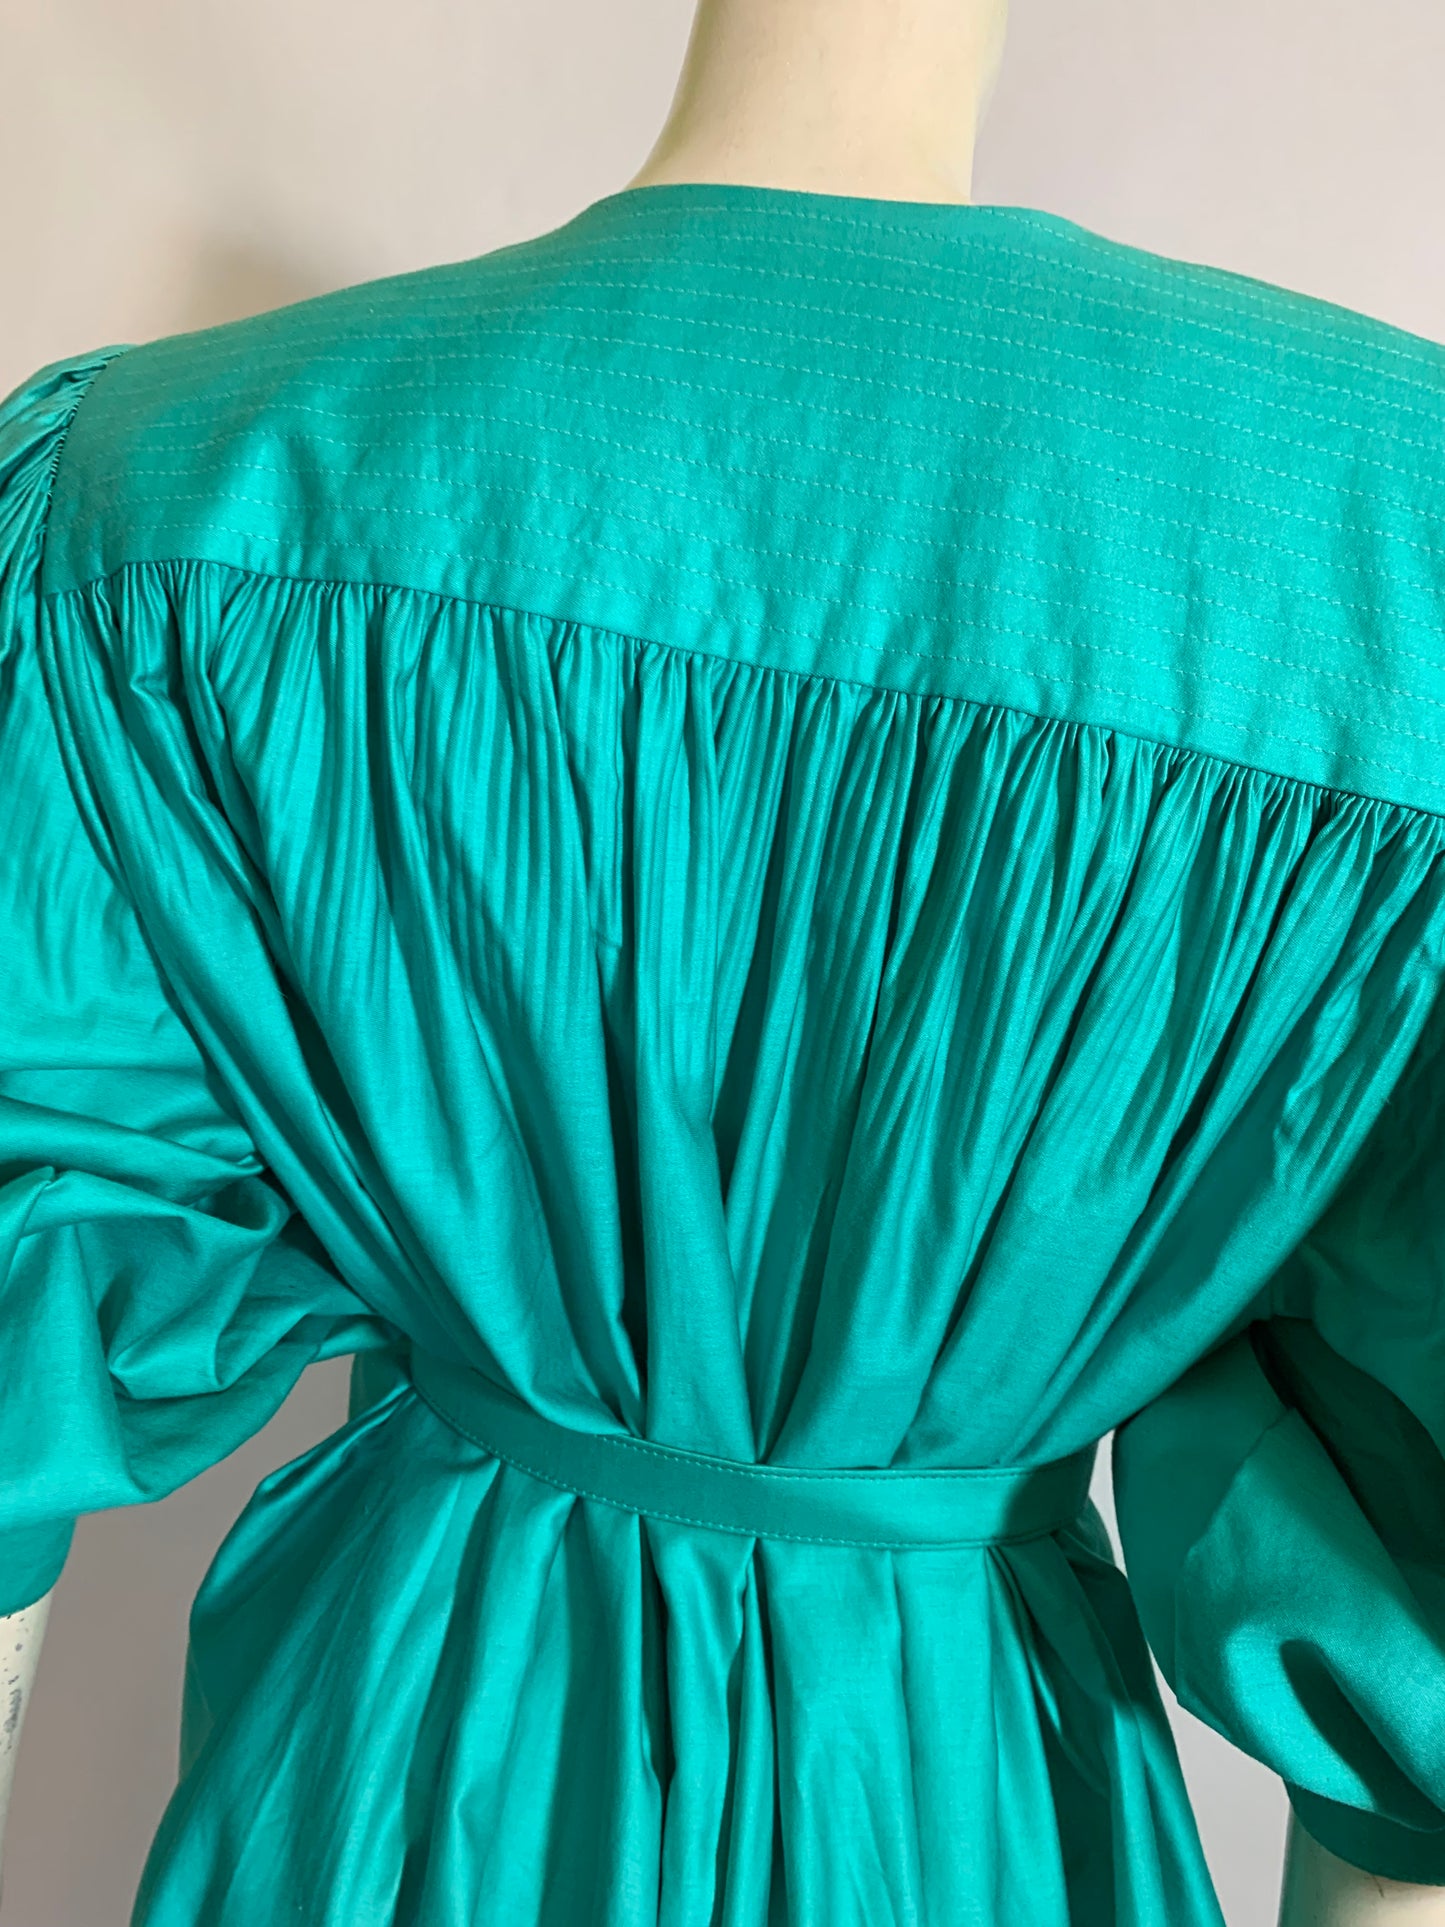 Bright Teal Cotton Belted Tent Dress with Voluminous Puff Sleeves circa 1980s